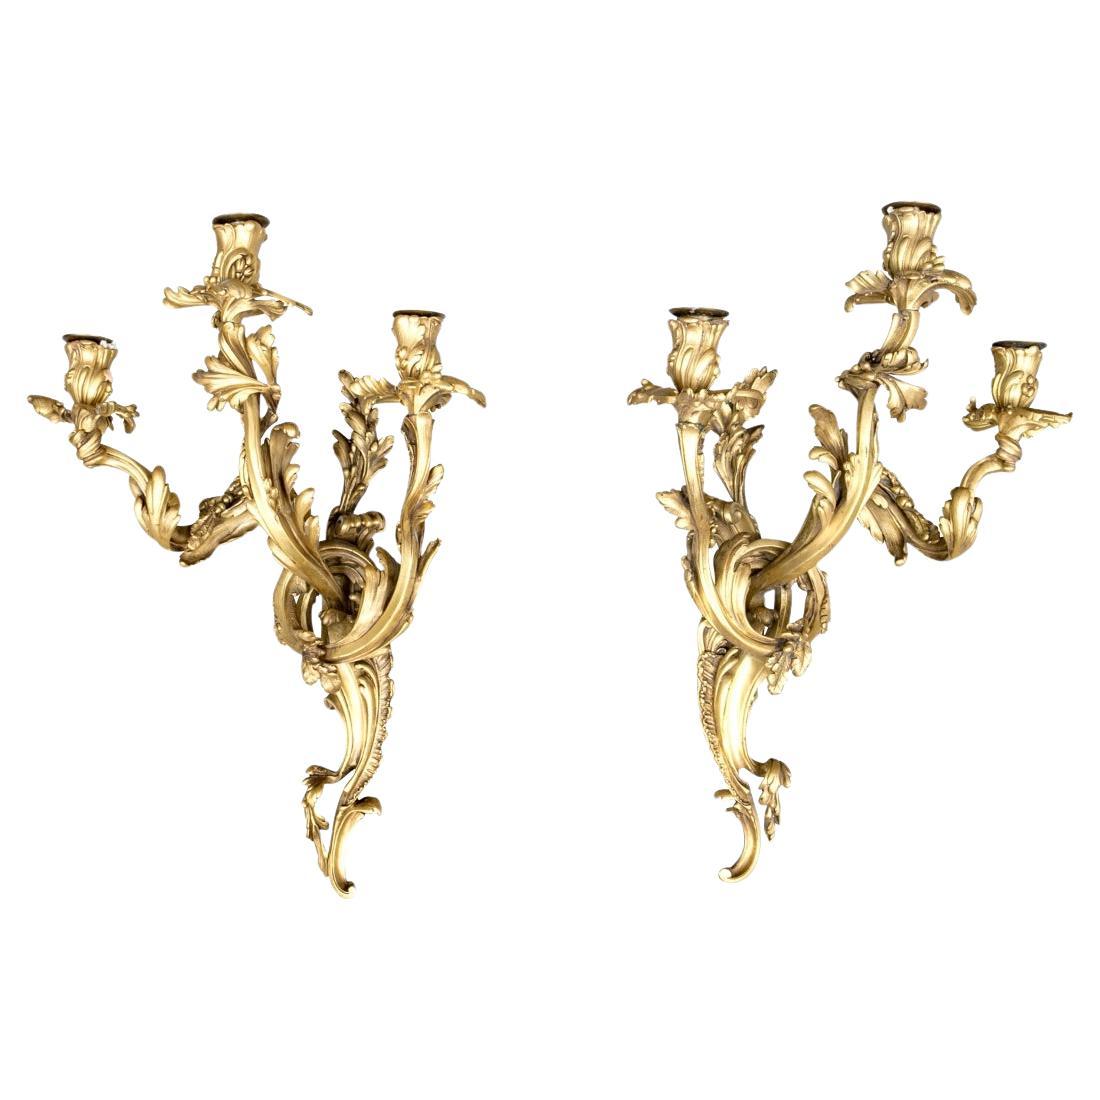 Pair Of E.F. Caldwell Gilt Bronze Louis XV Style Wall Sconces